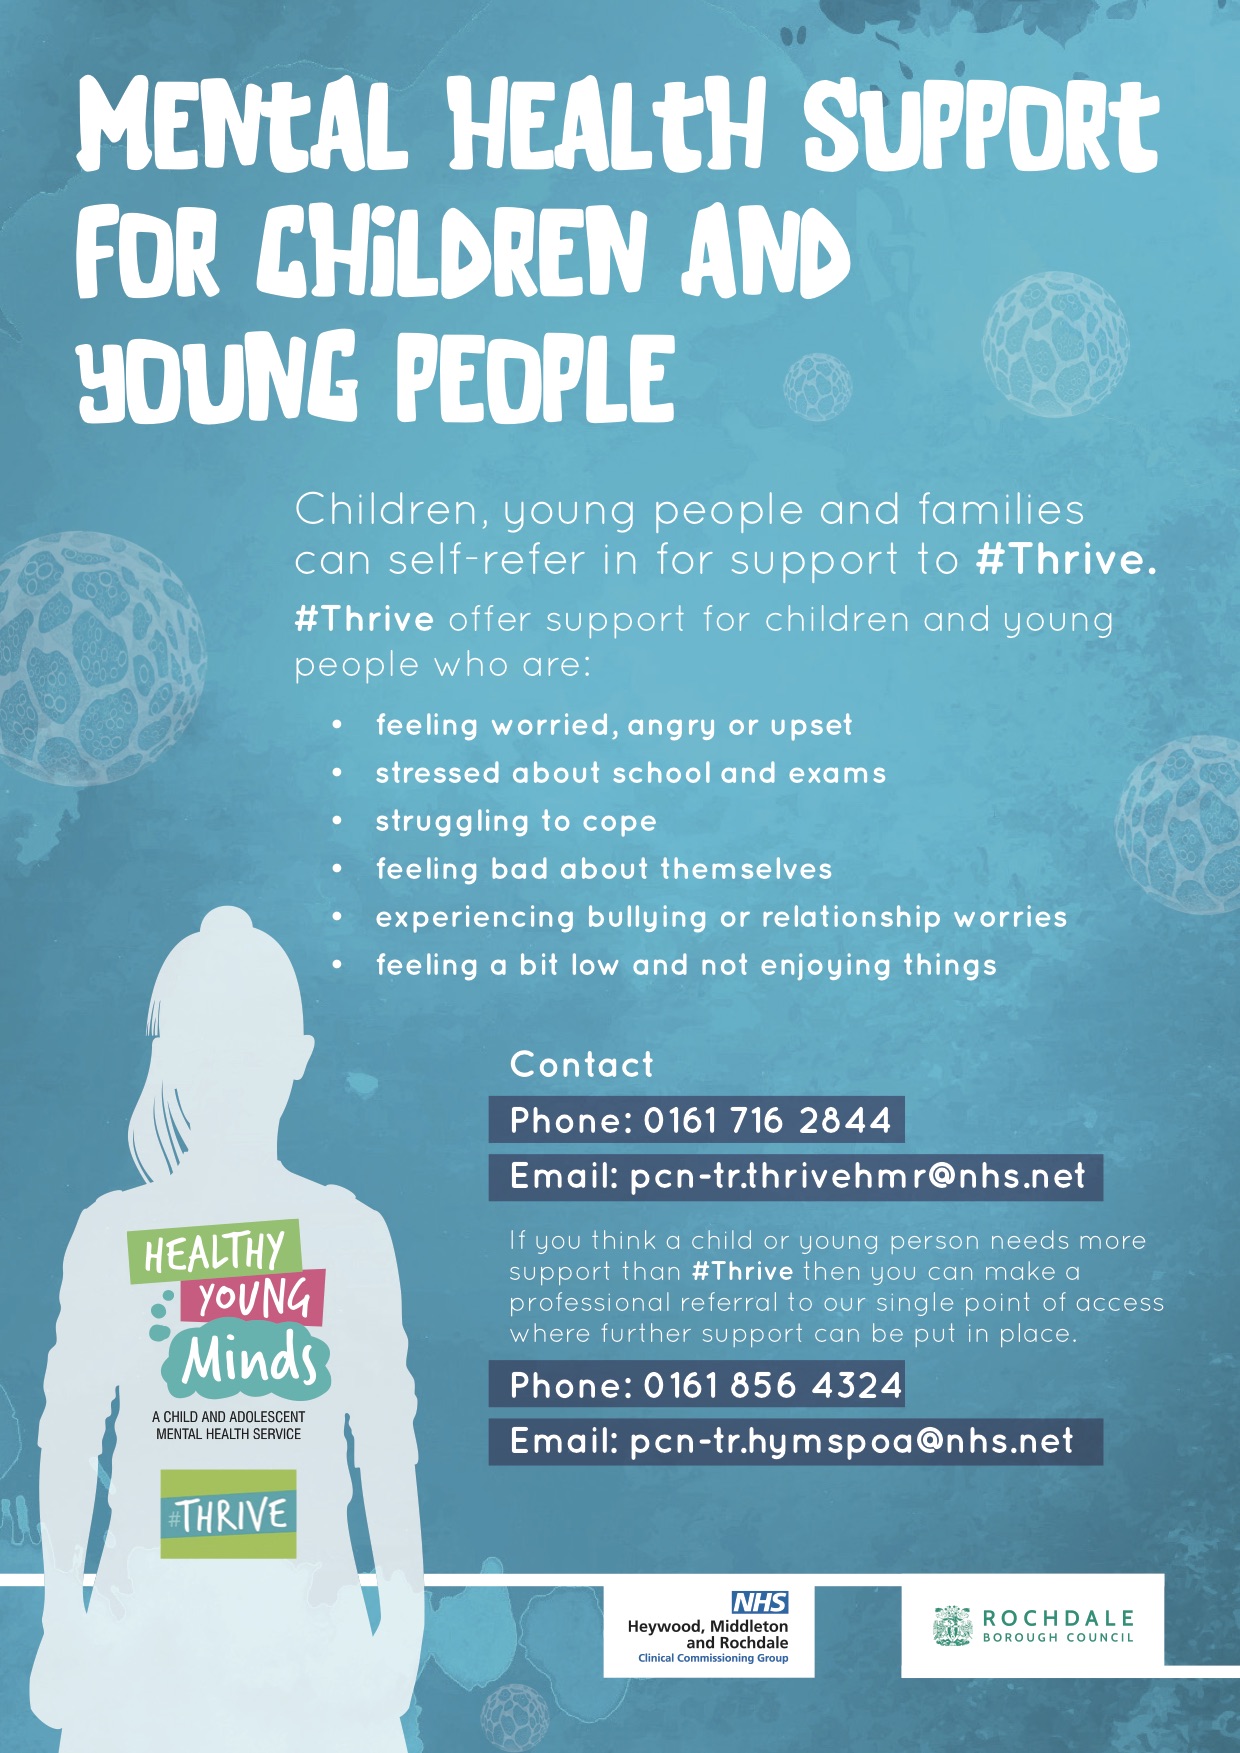 Mental Health Support for Children and Young People